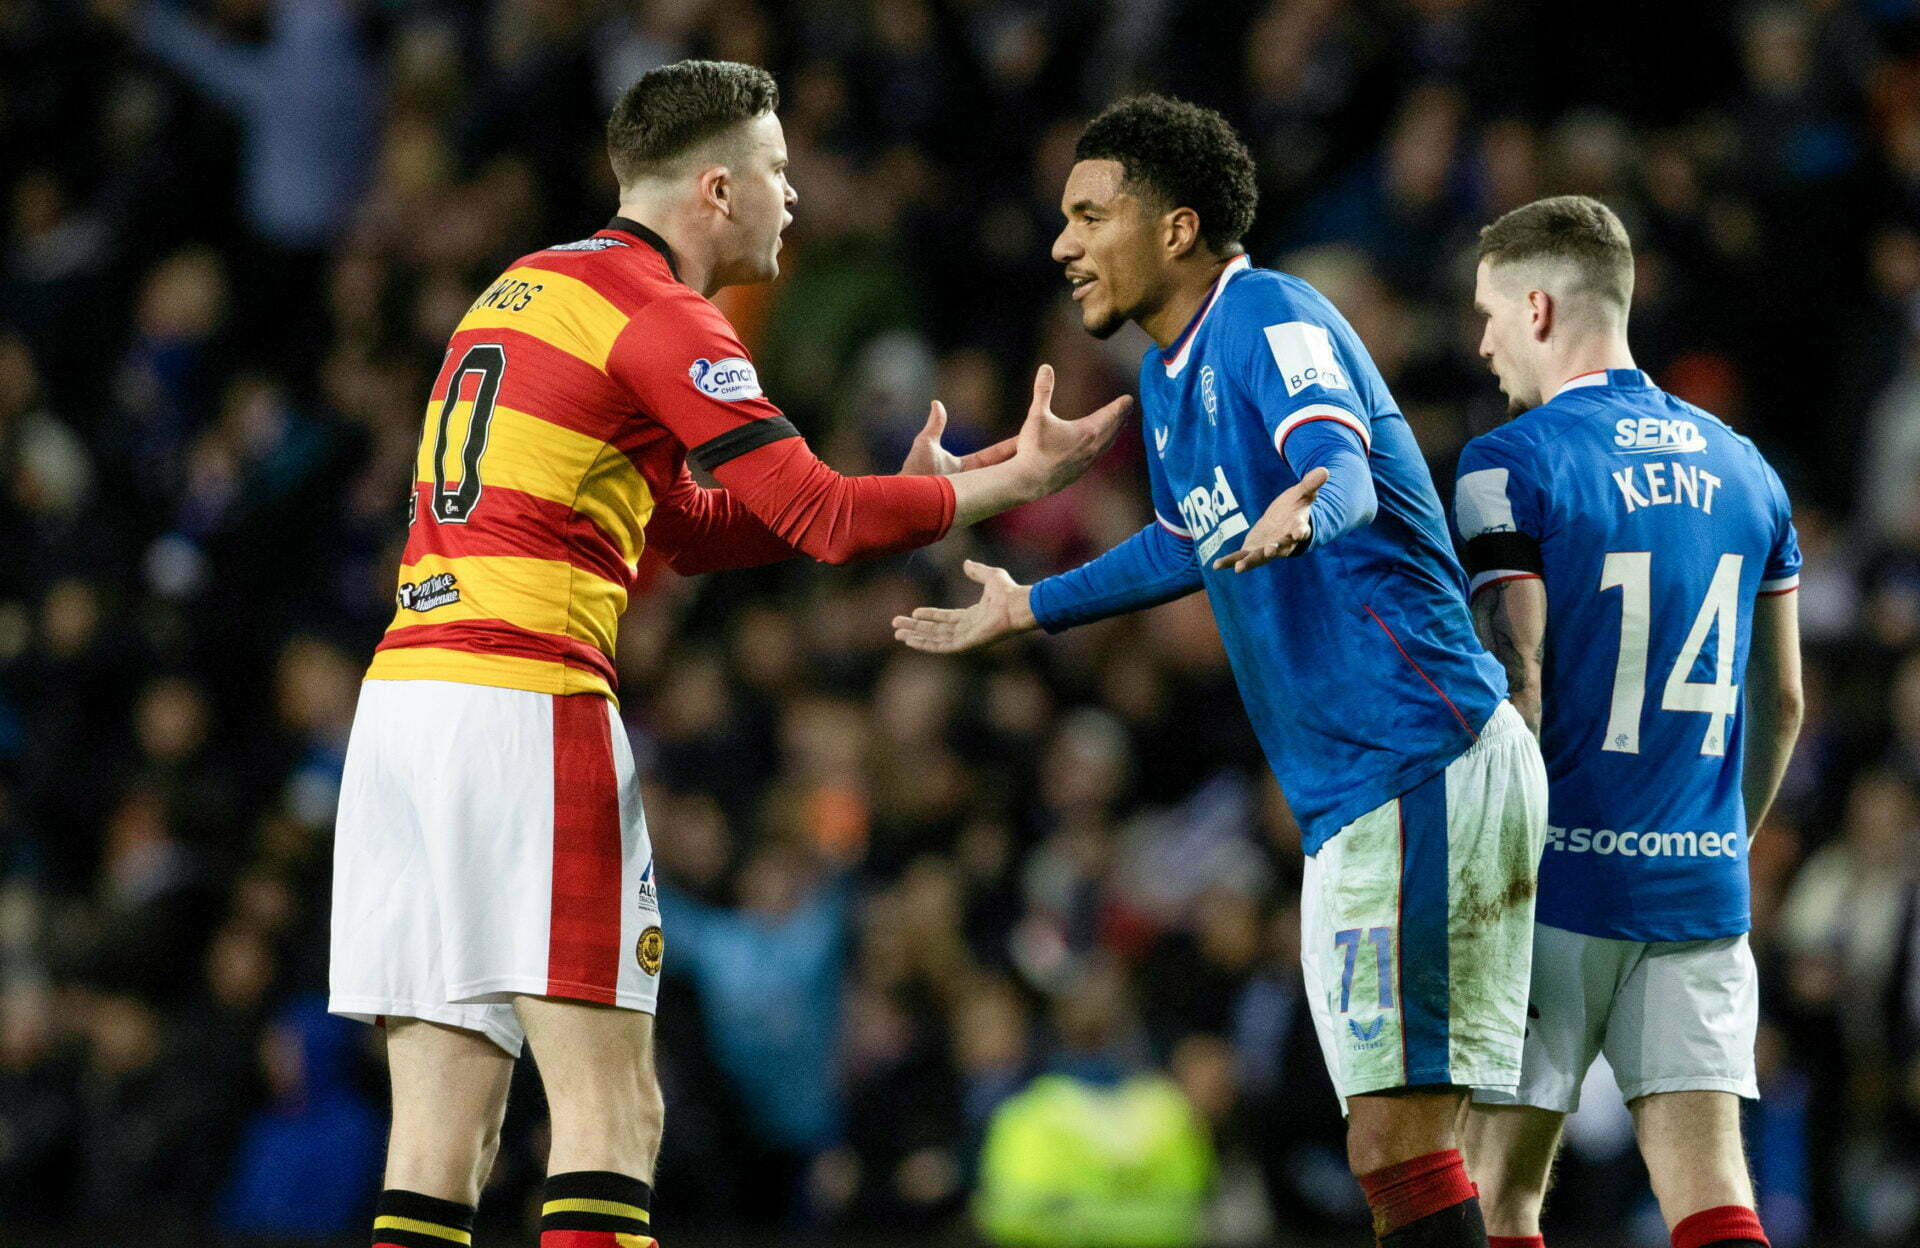 Alison McConnell: Rangers emerged with moral victory against Partick Thistle